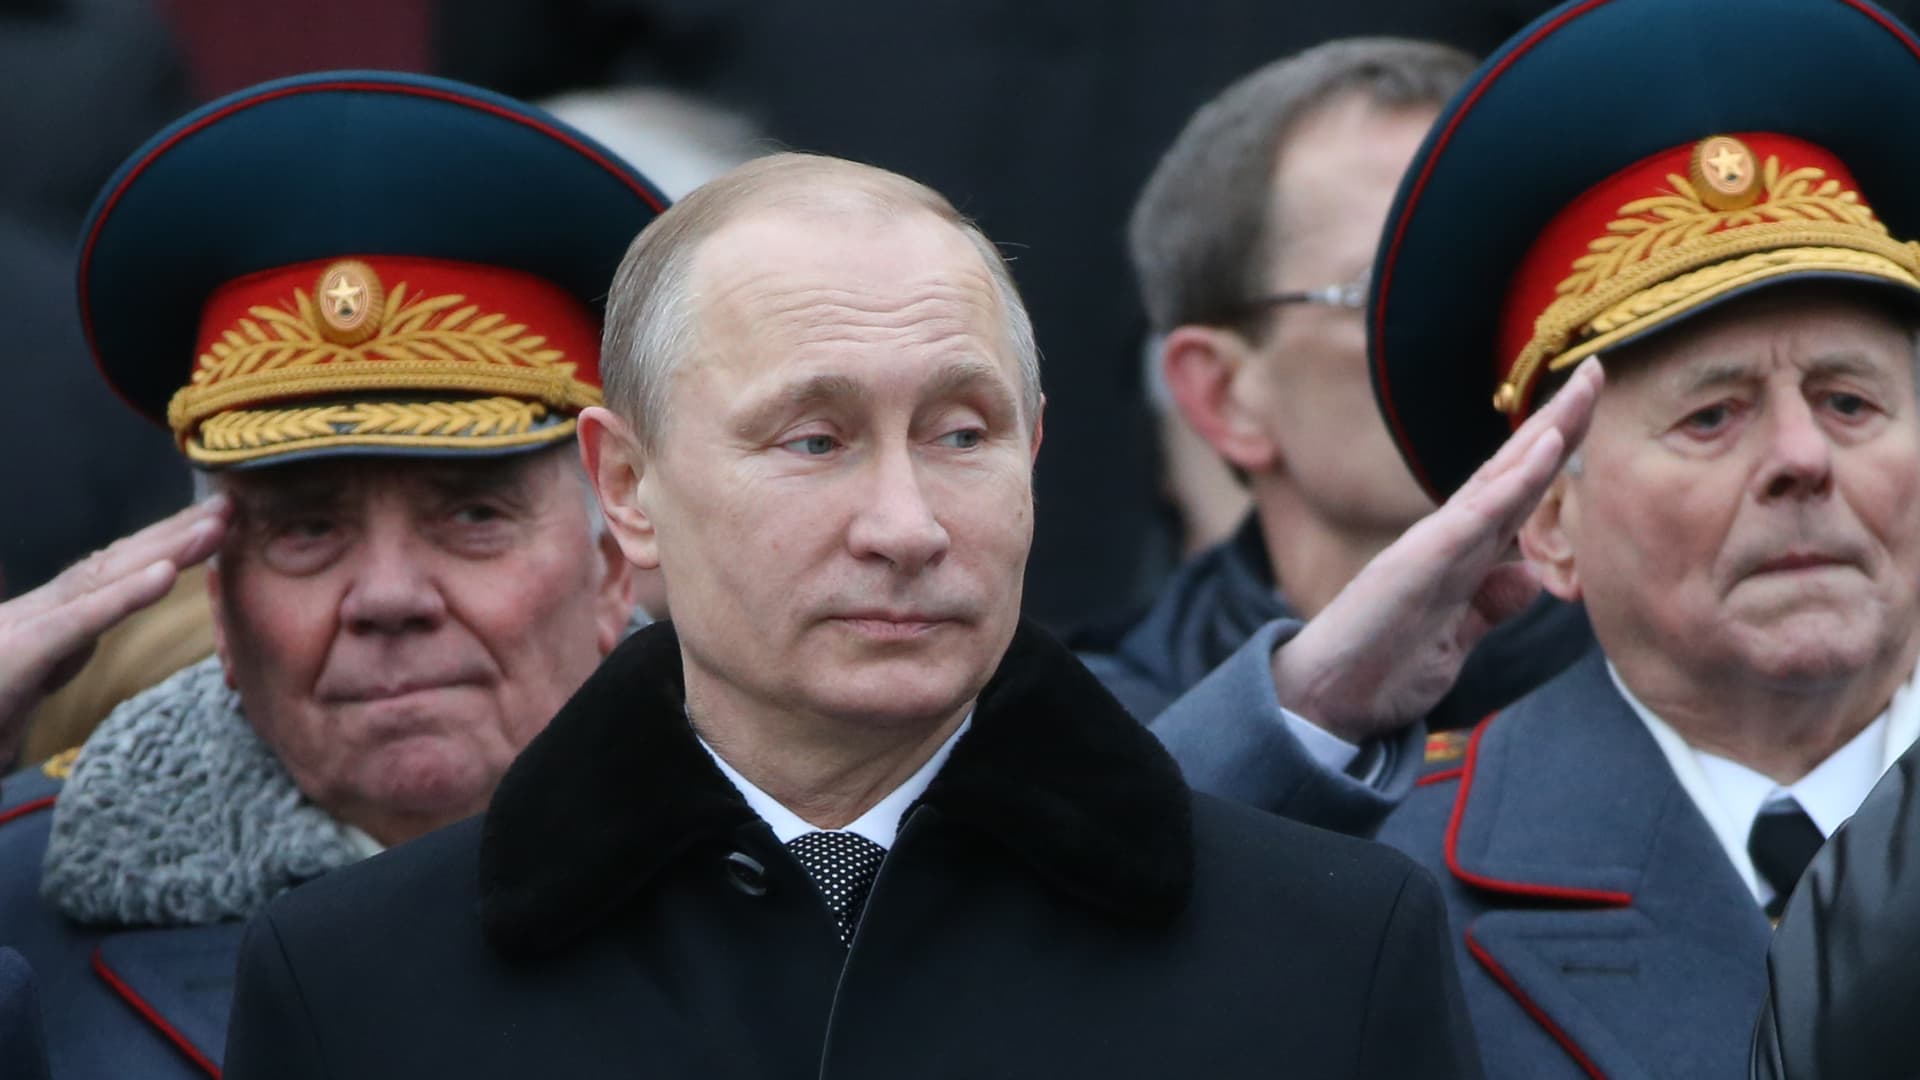 Russian President Vladimir Putin, flanked by military officials, marks the Defender of the Fatherland Day in 2015 in central Moscow.